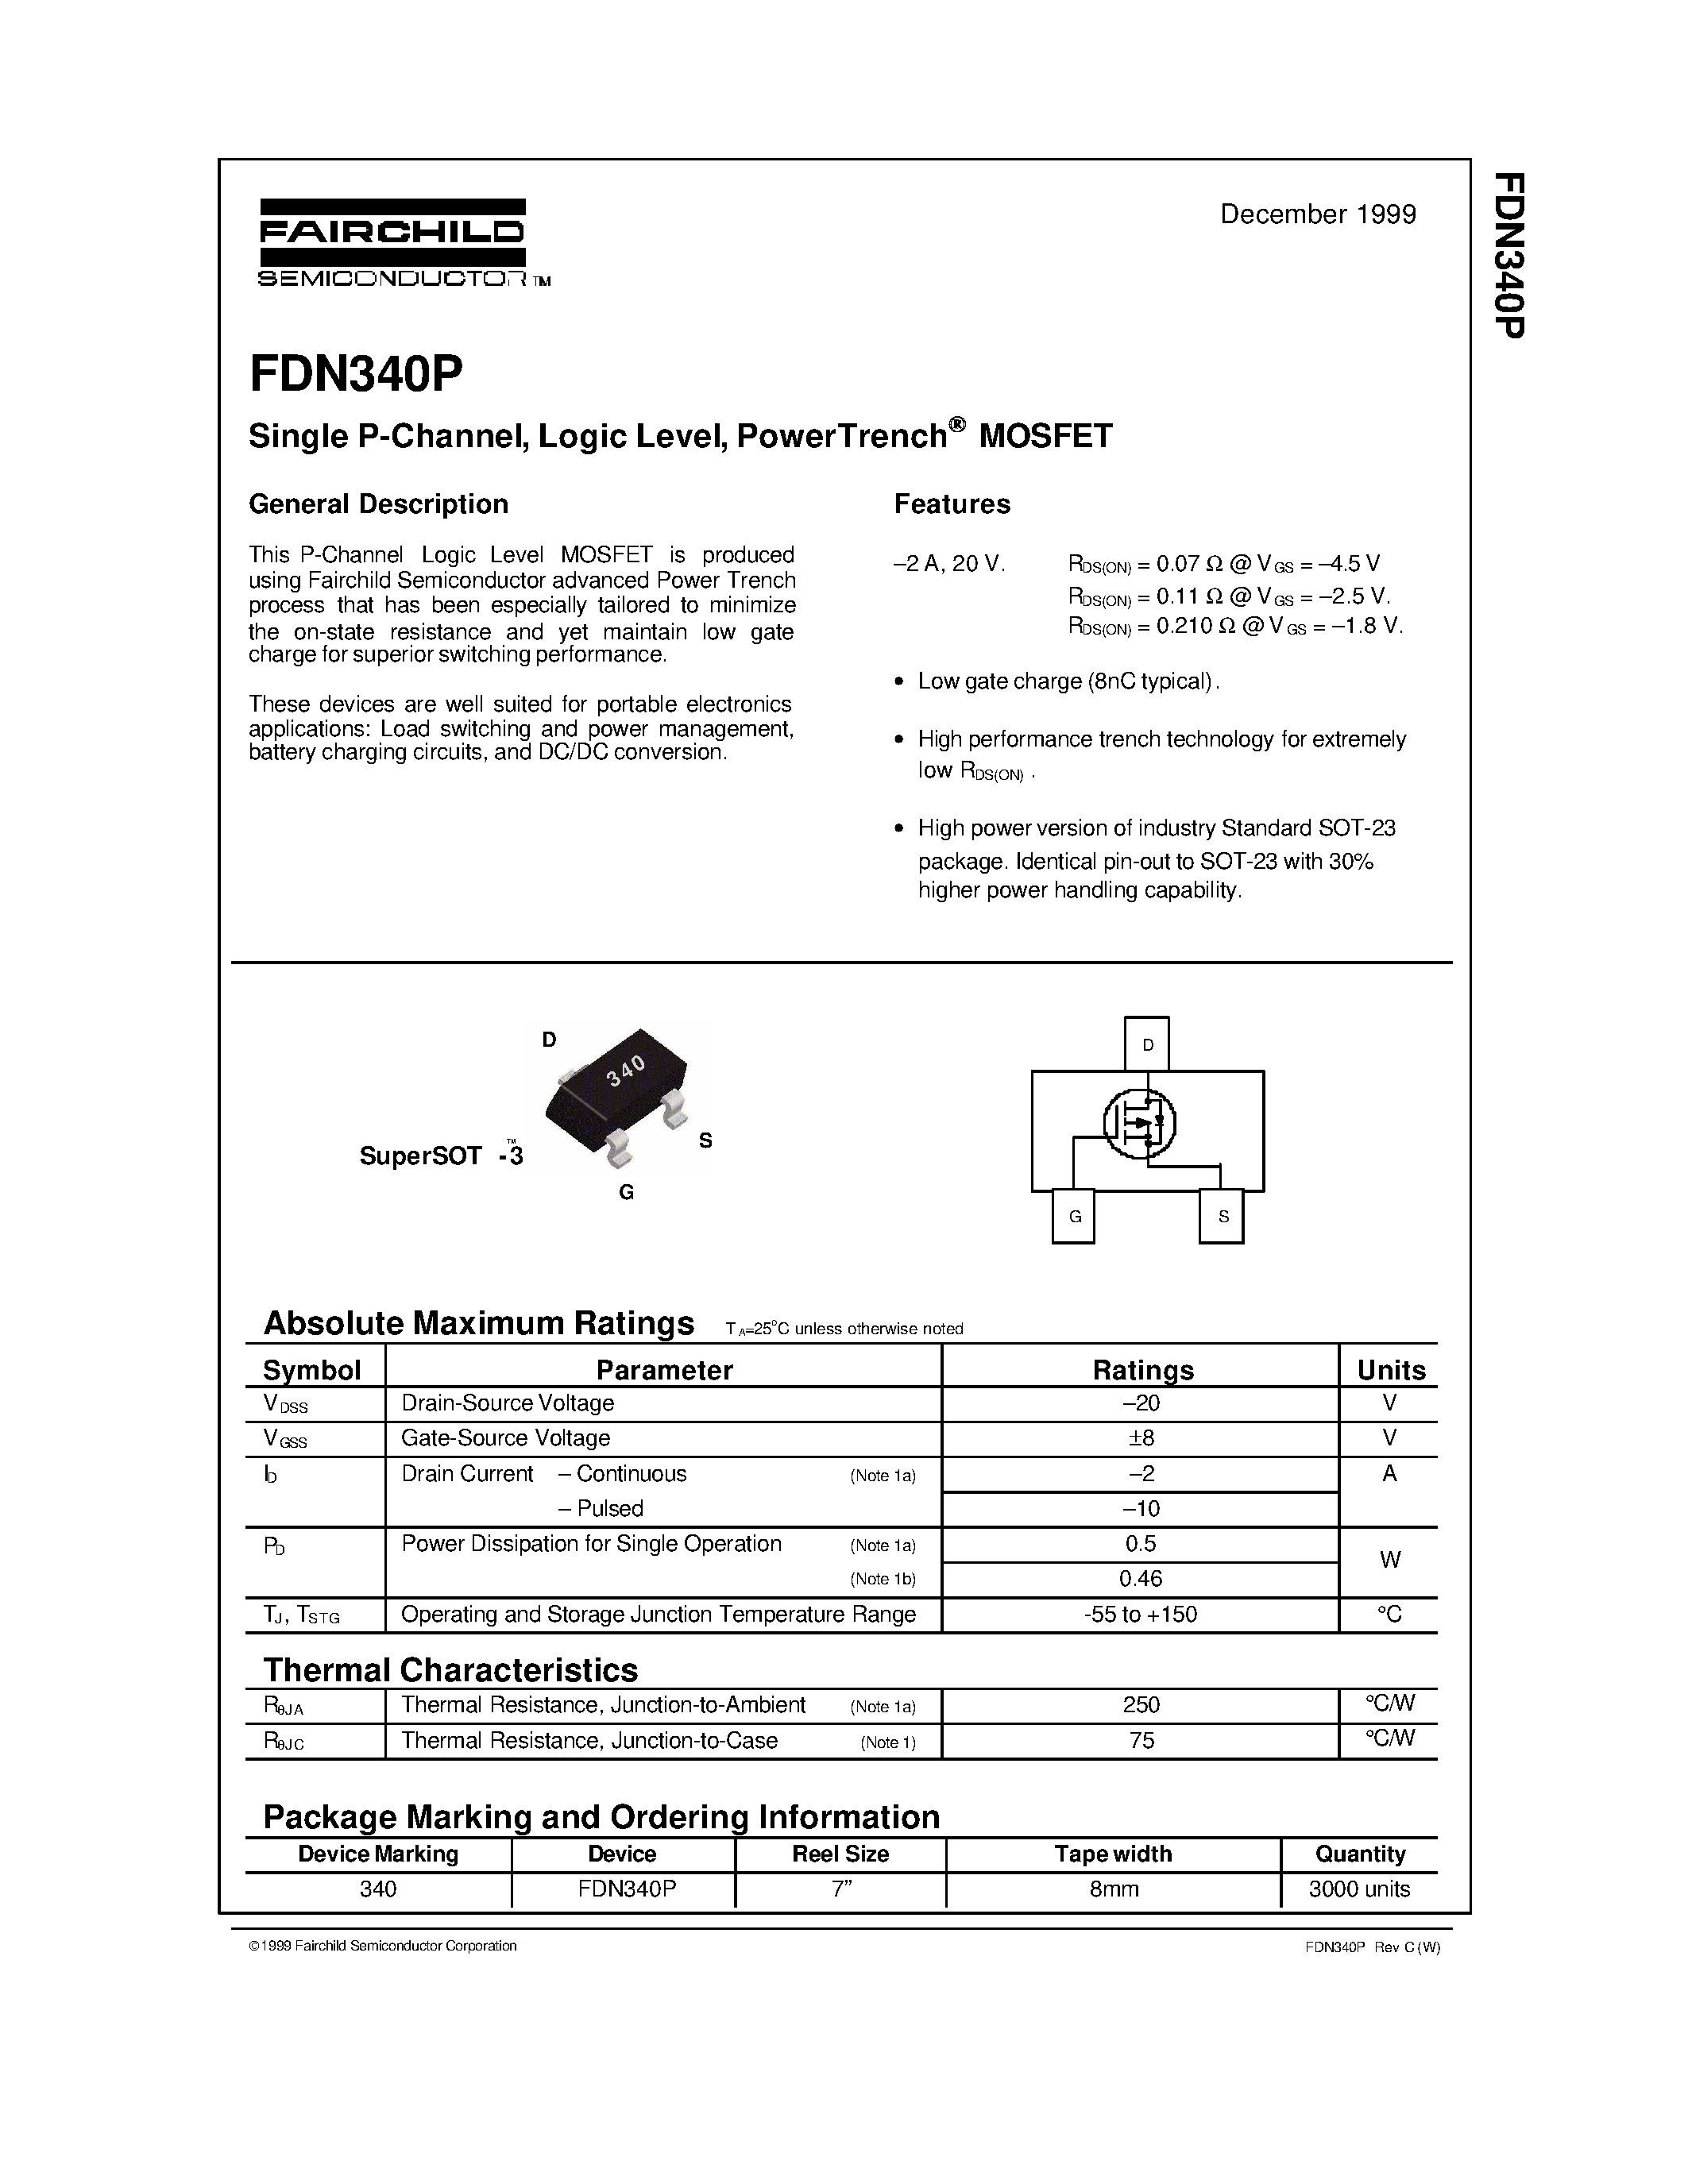 Datasheet FDN340 - Single P-Channel/ Logic Level/ PowerTrench MOSFET page 1